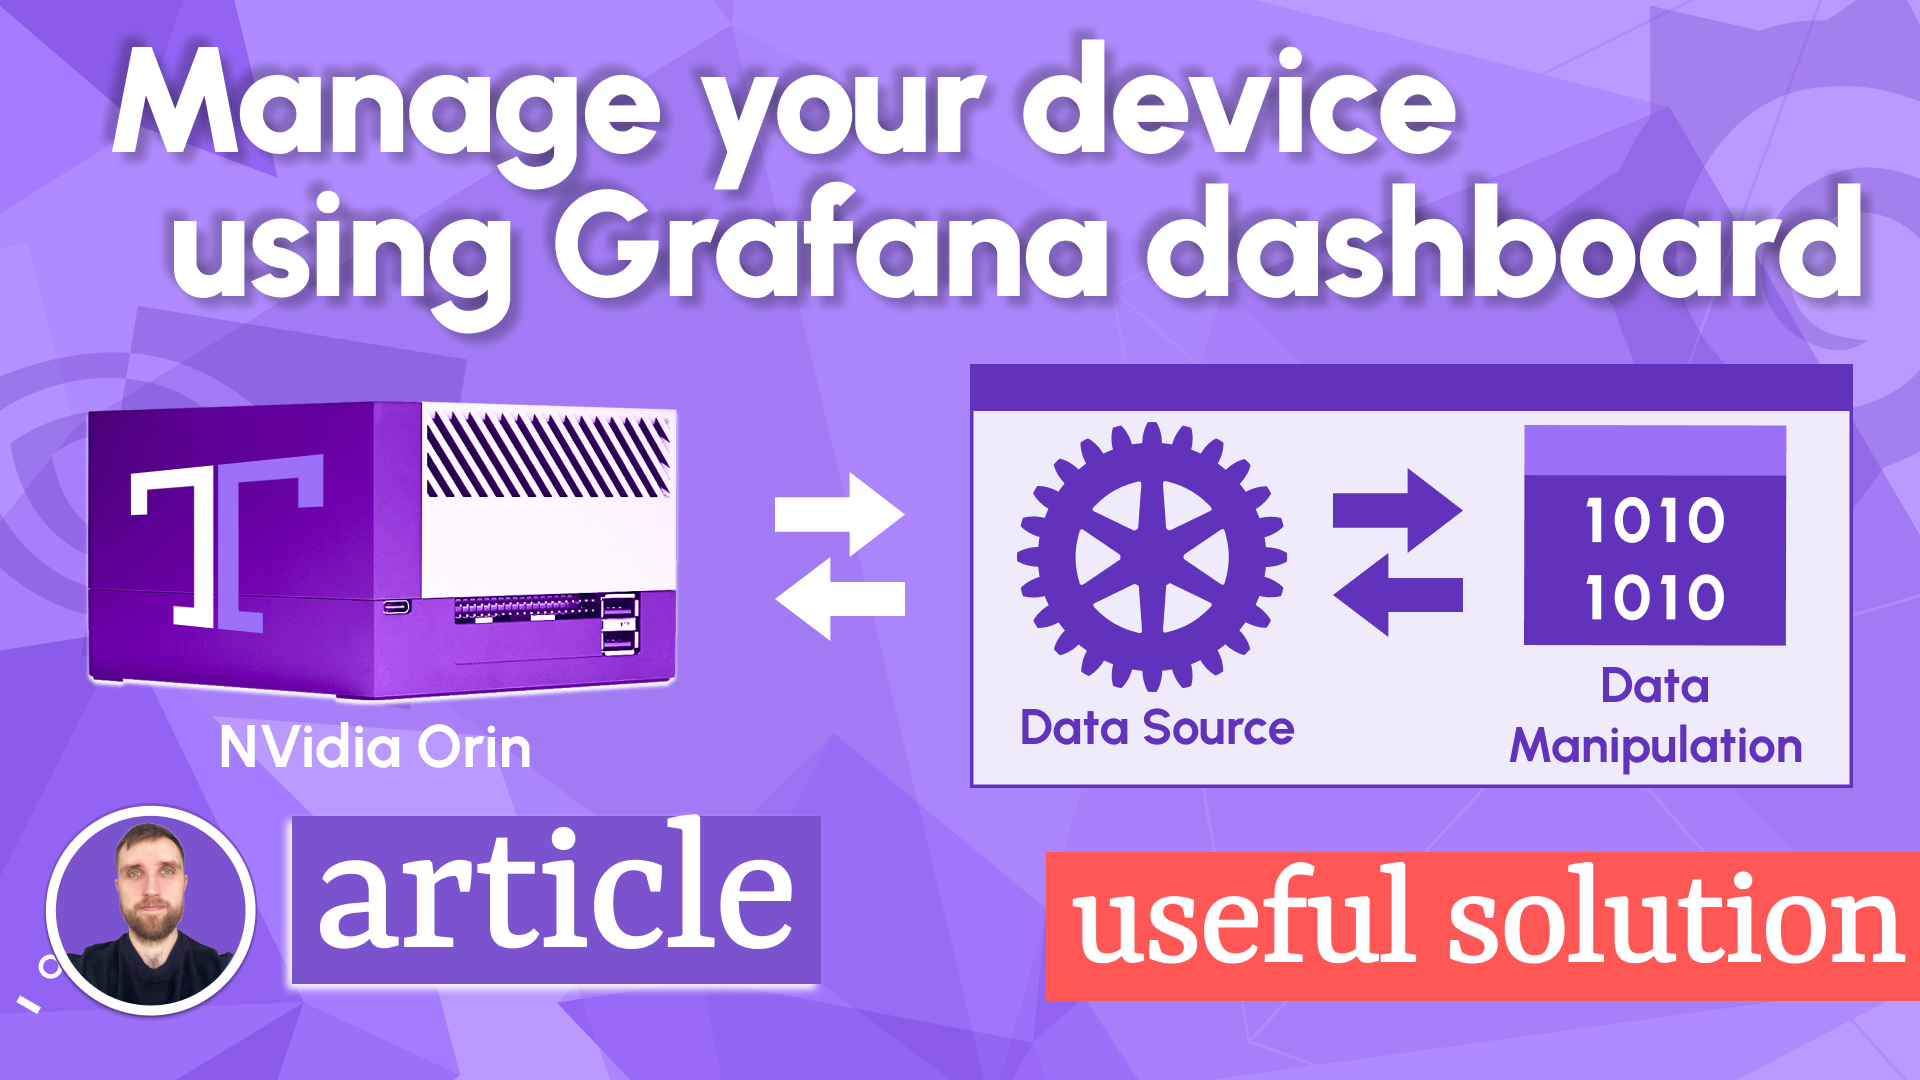 Manage your device using the Grafana dashboard